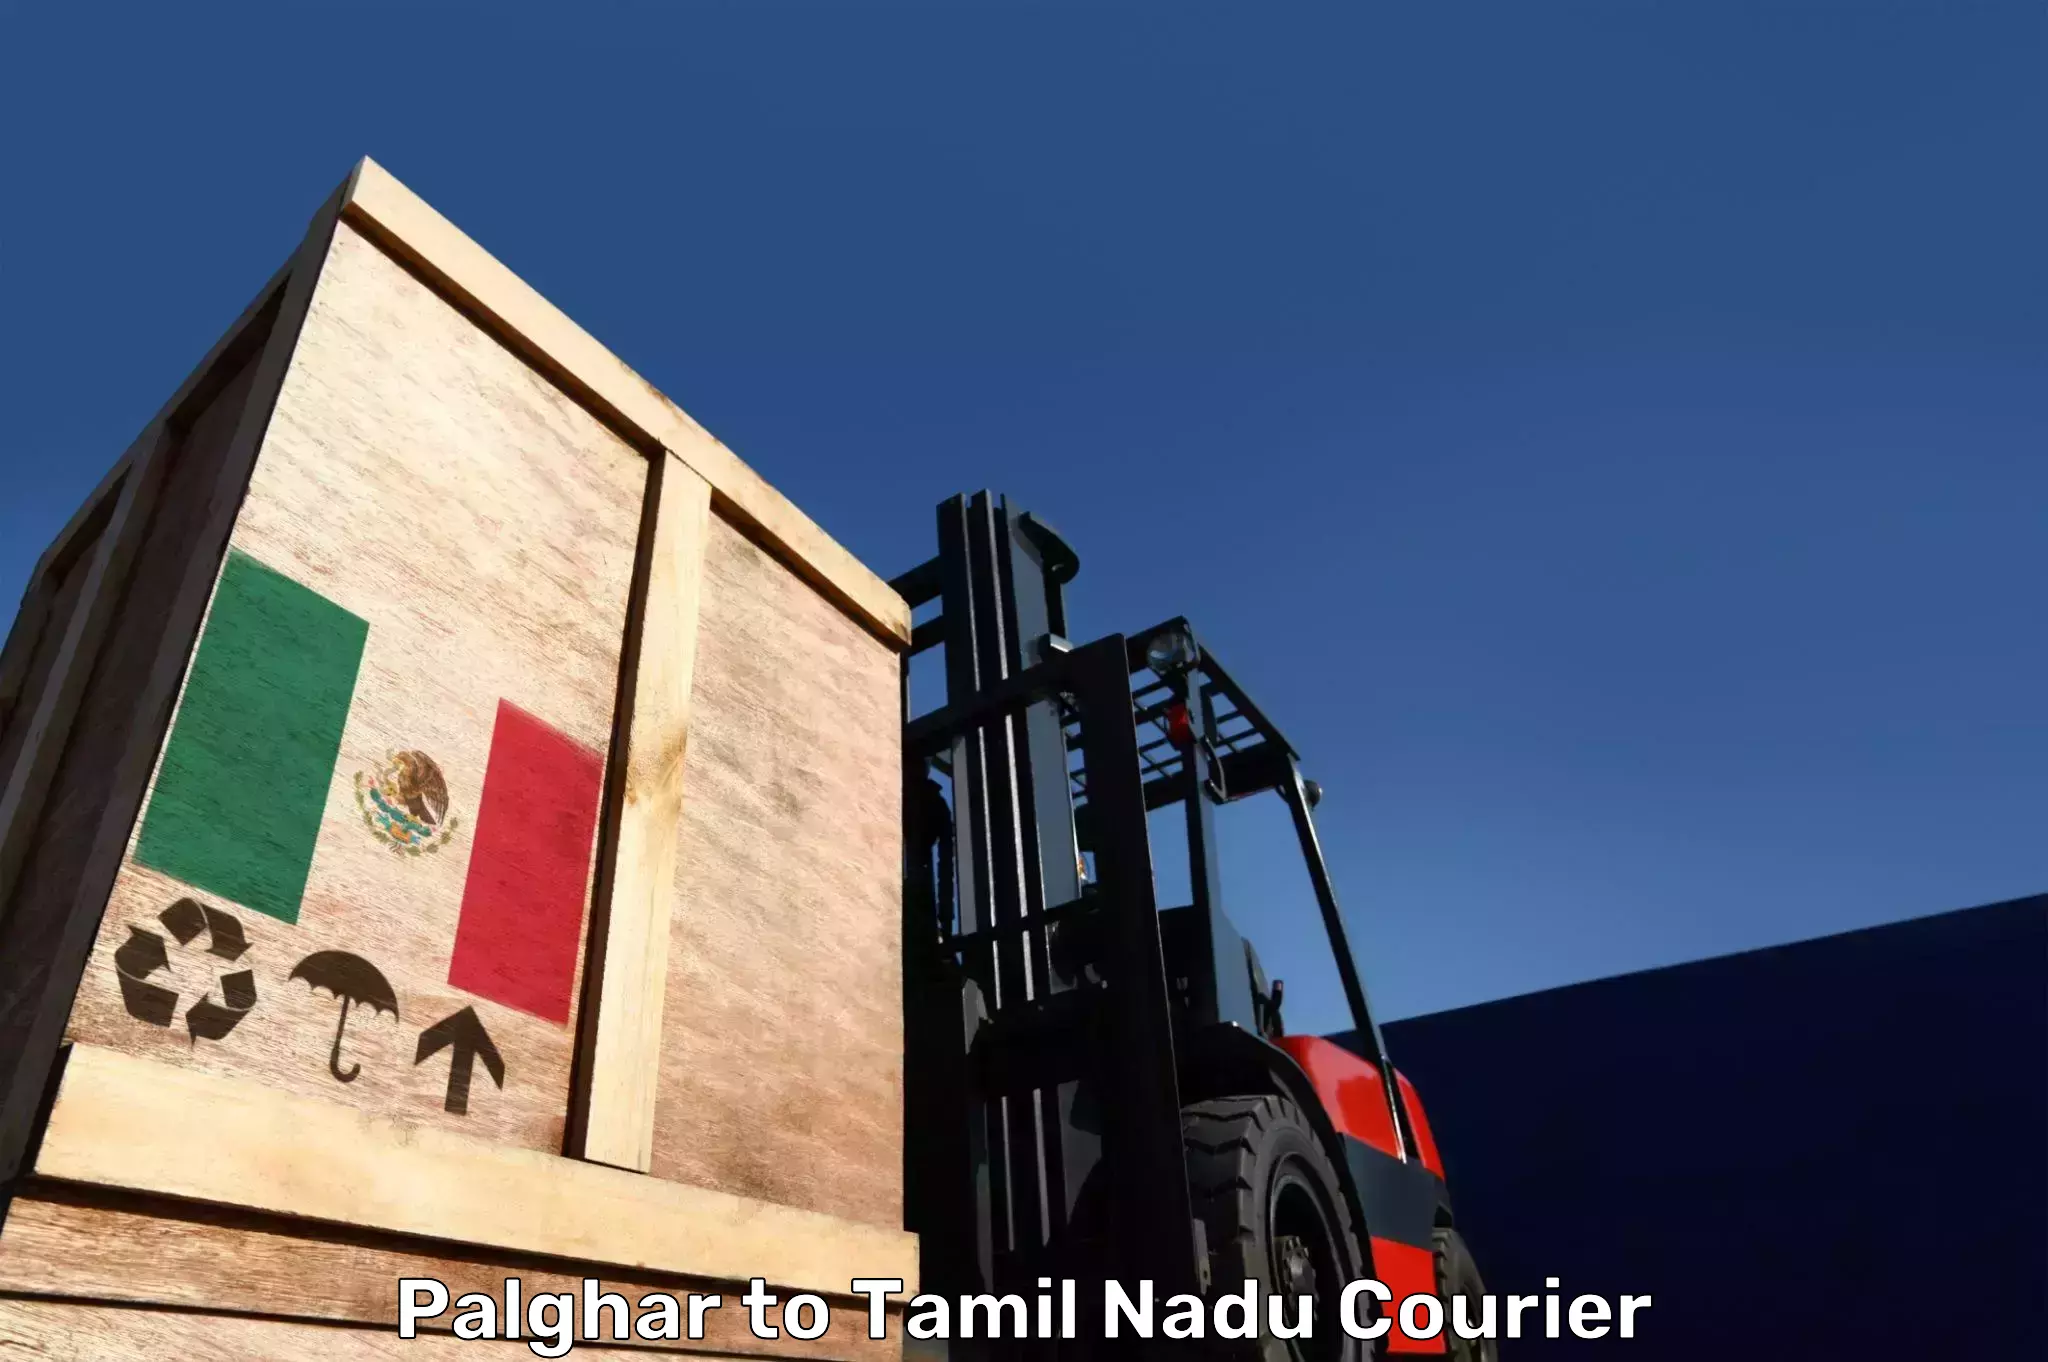 Luggage shipment specialists Palghar to Melur